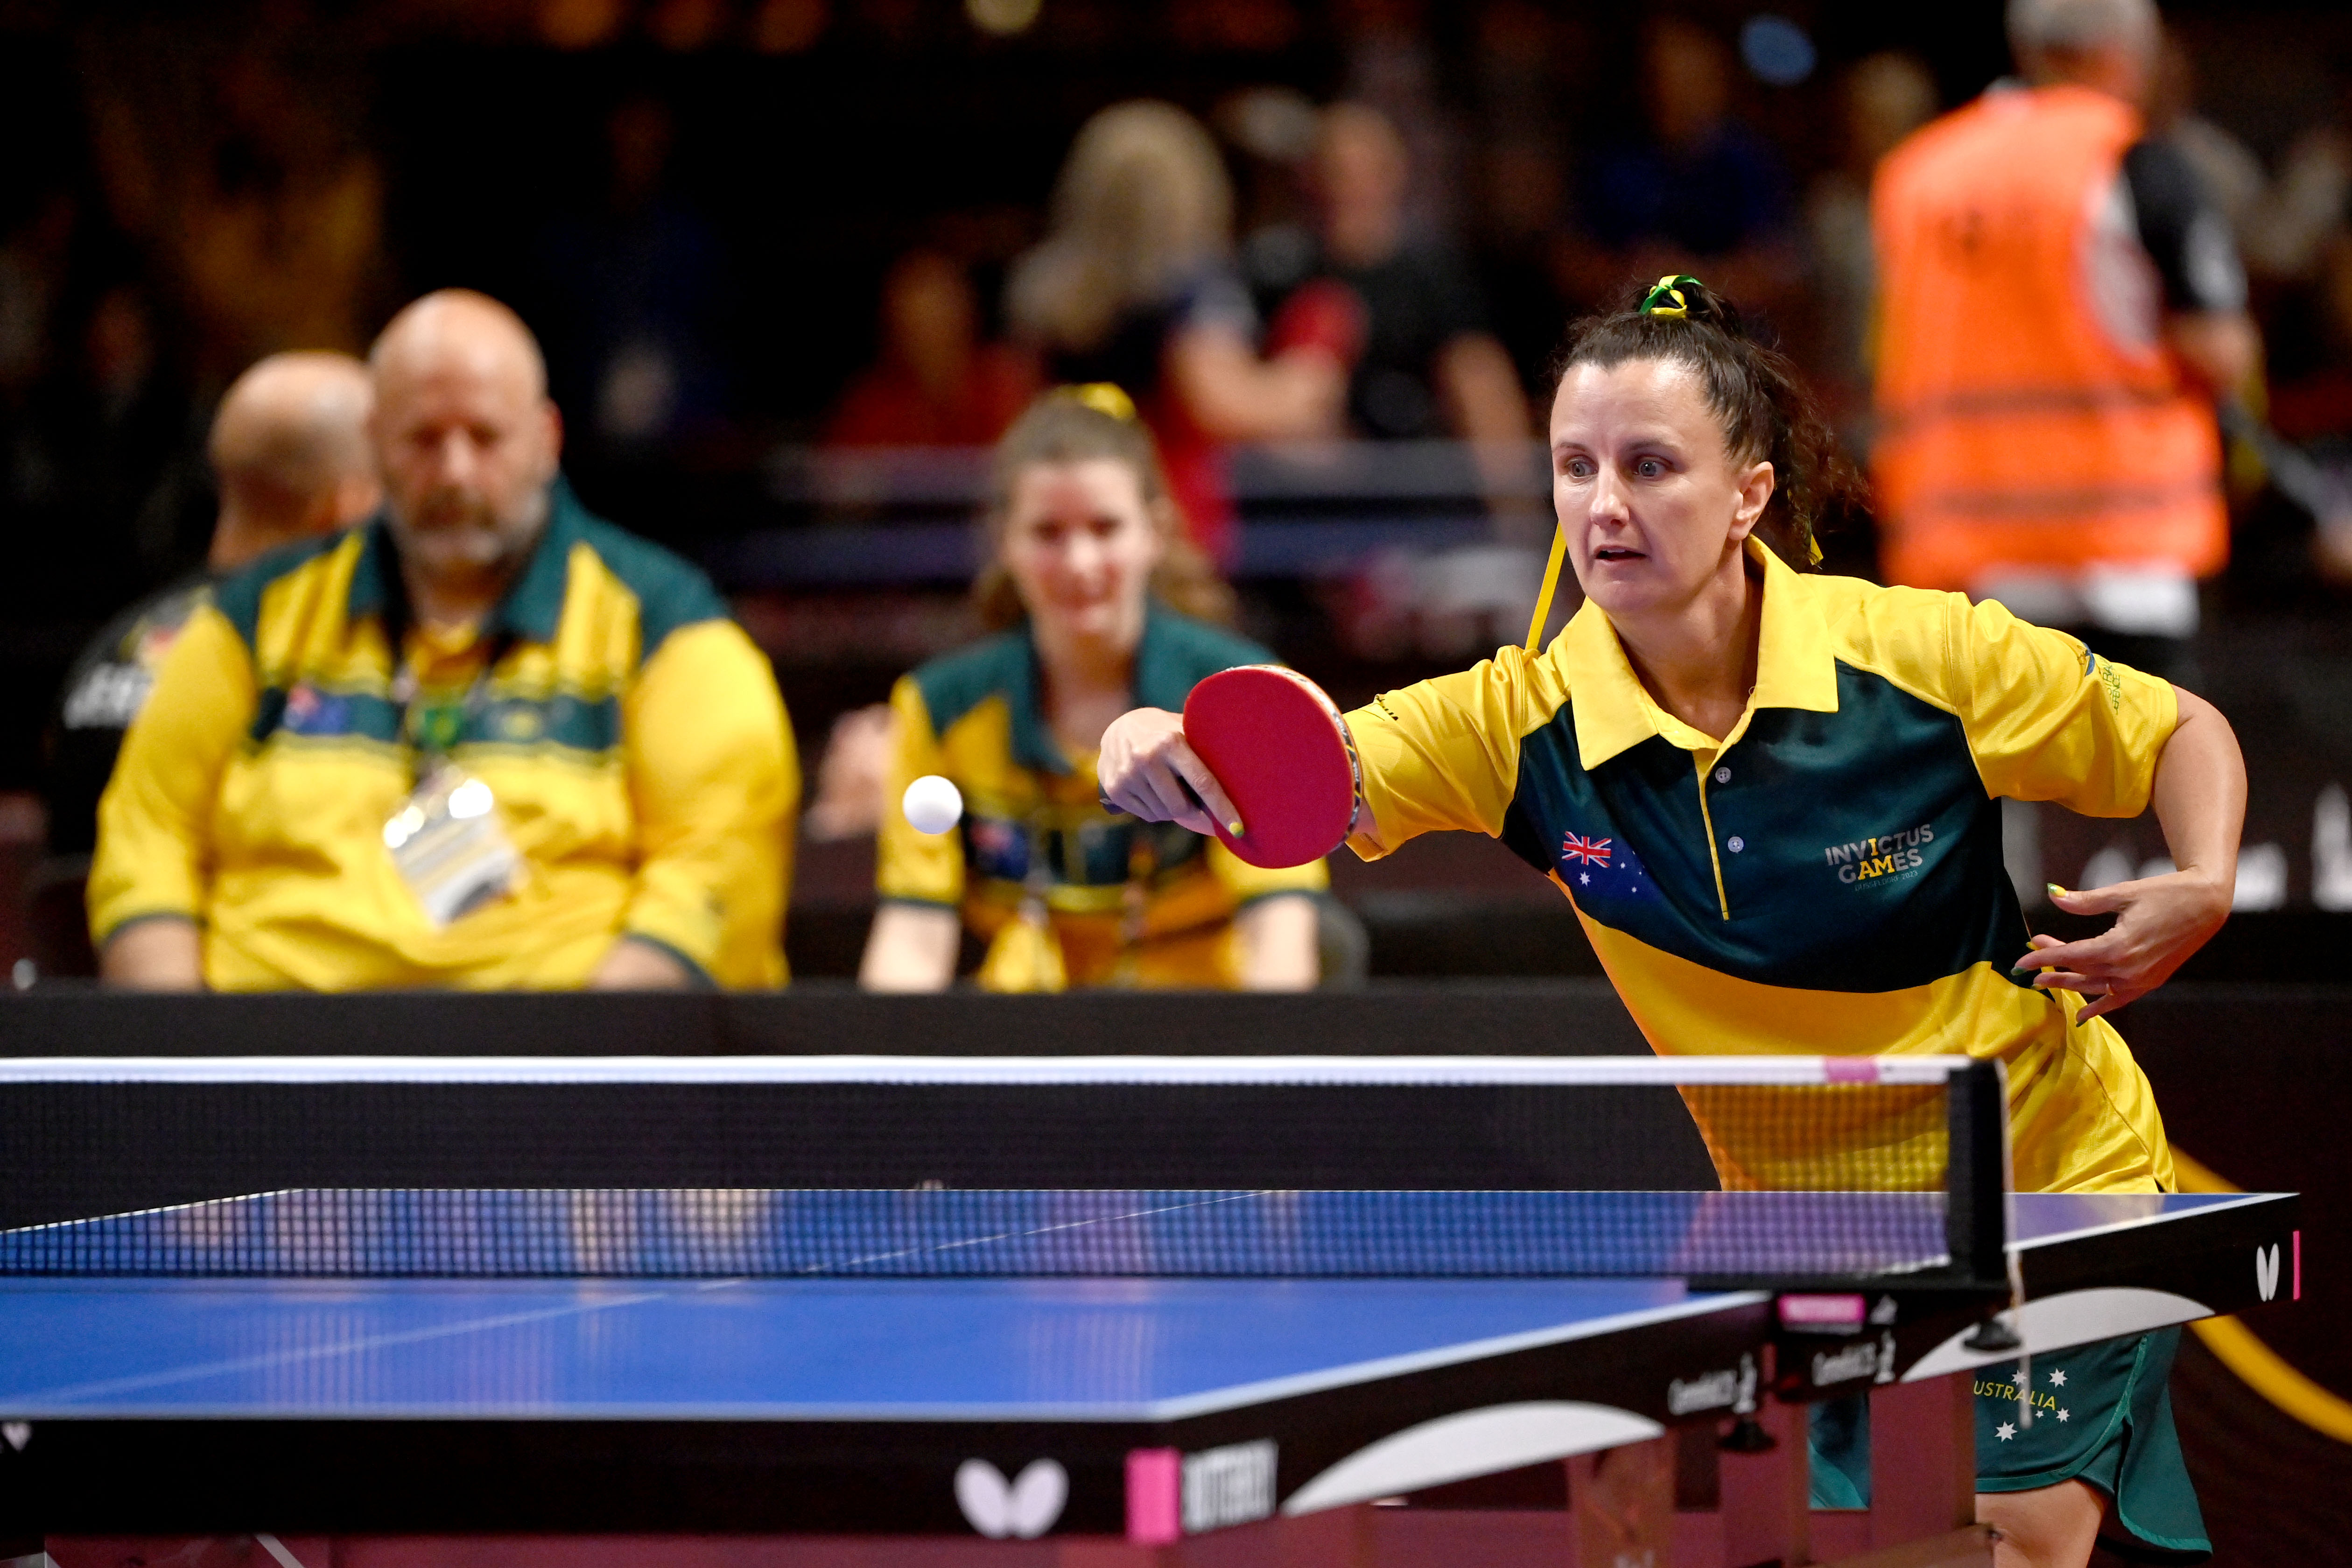 Verity Sanchez competes in the table tennis at Invictus Games Dusseldorf 2023